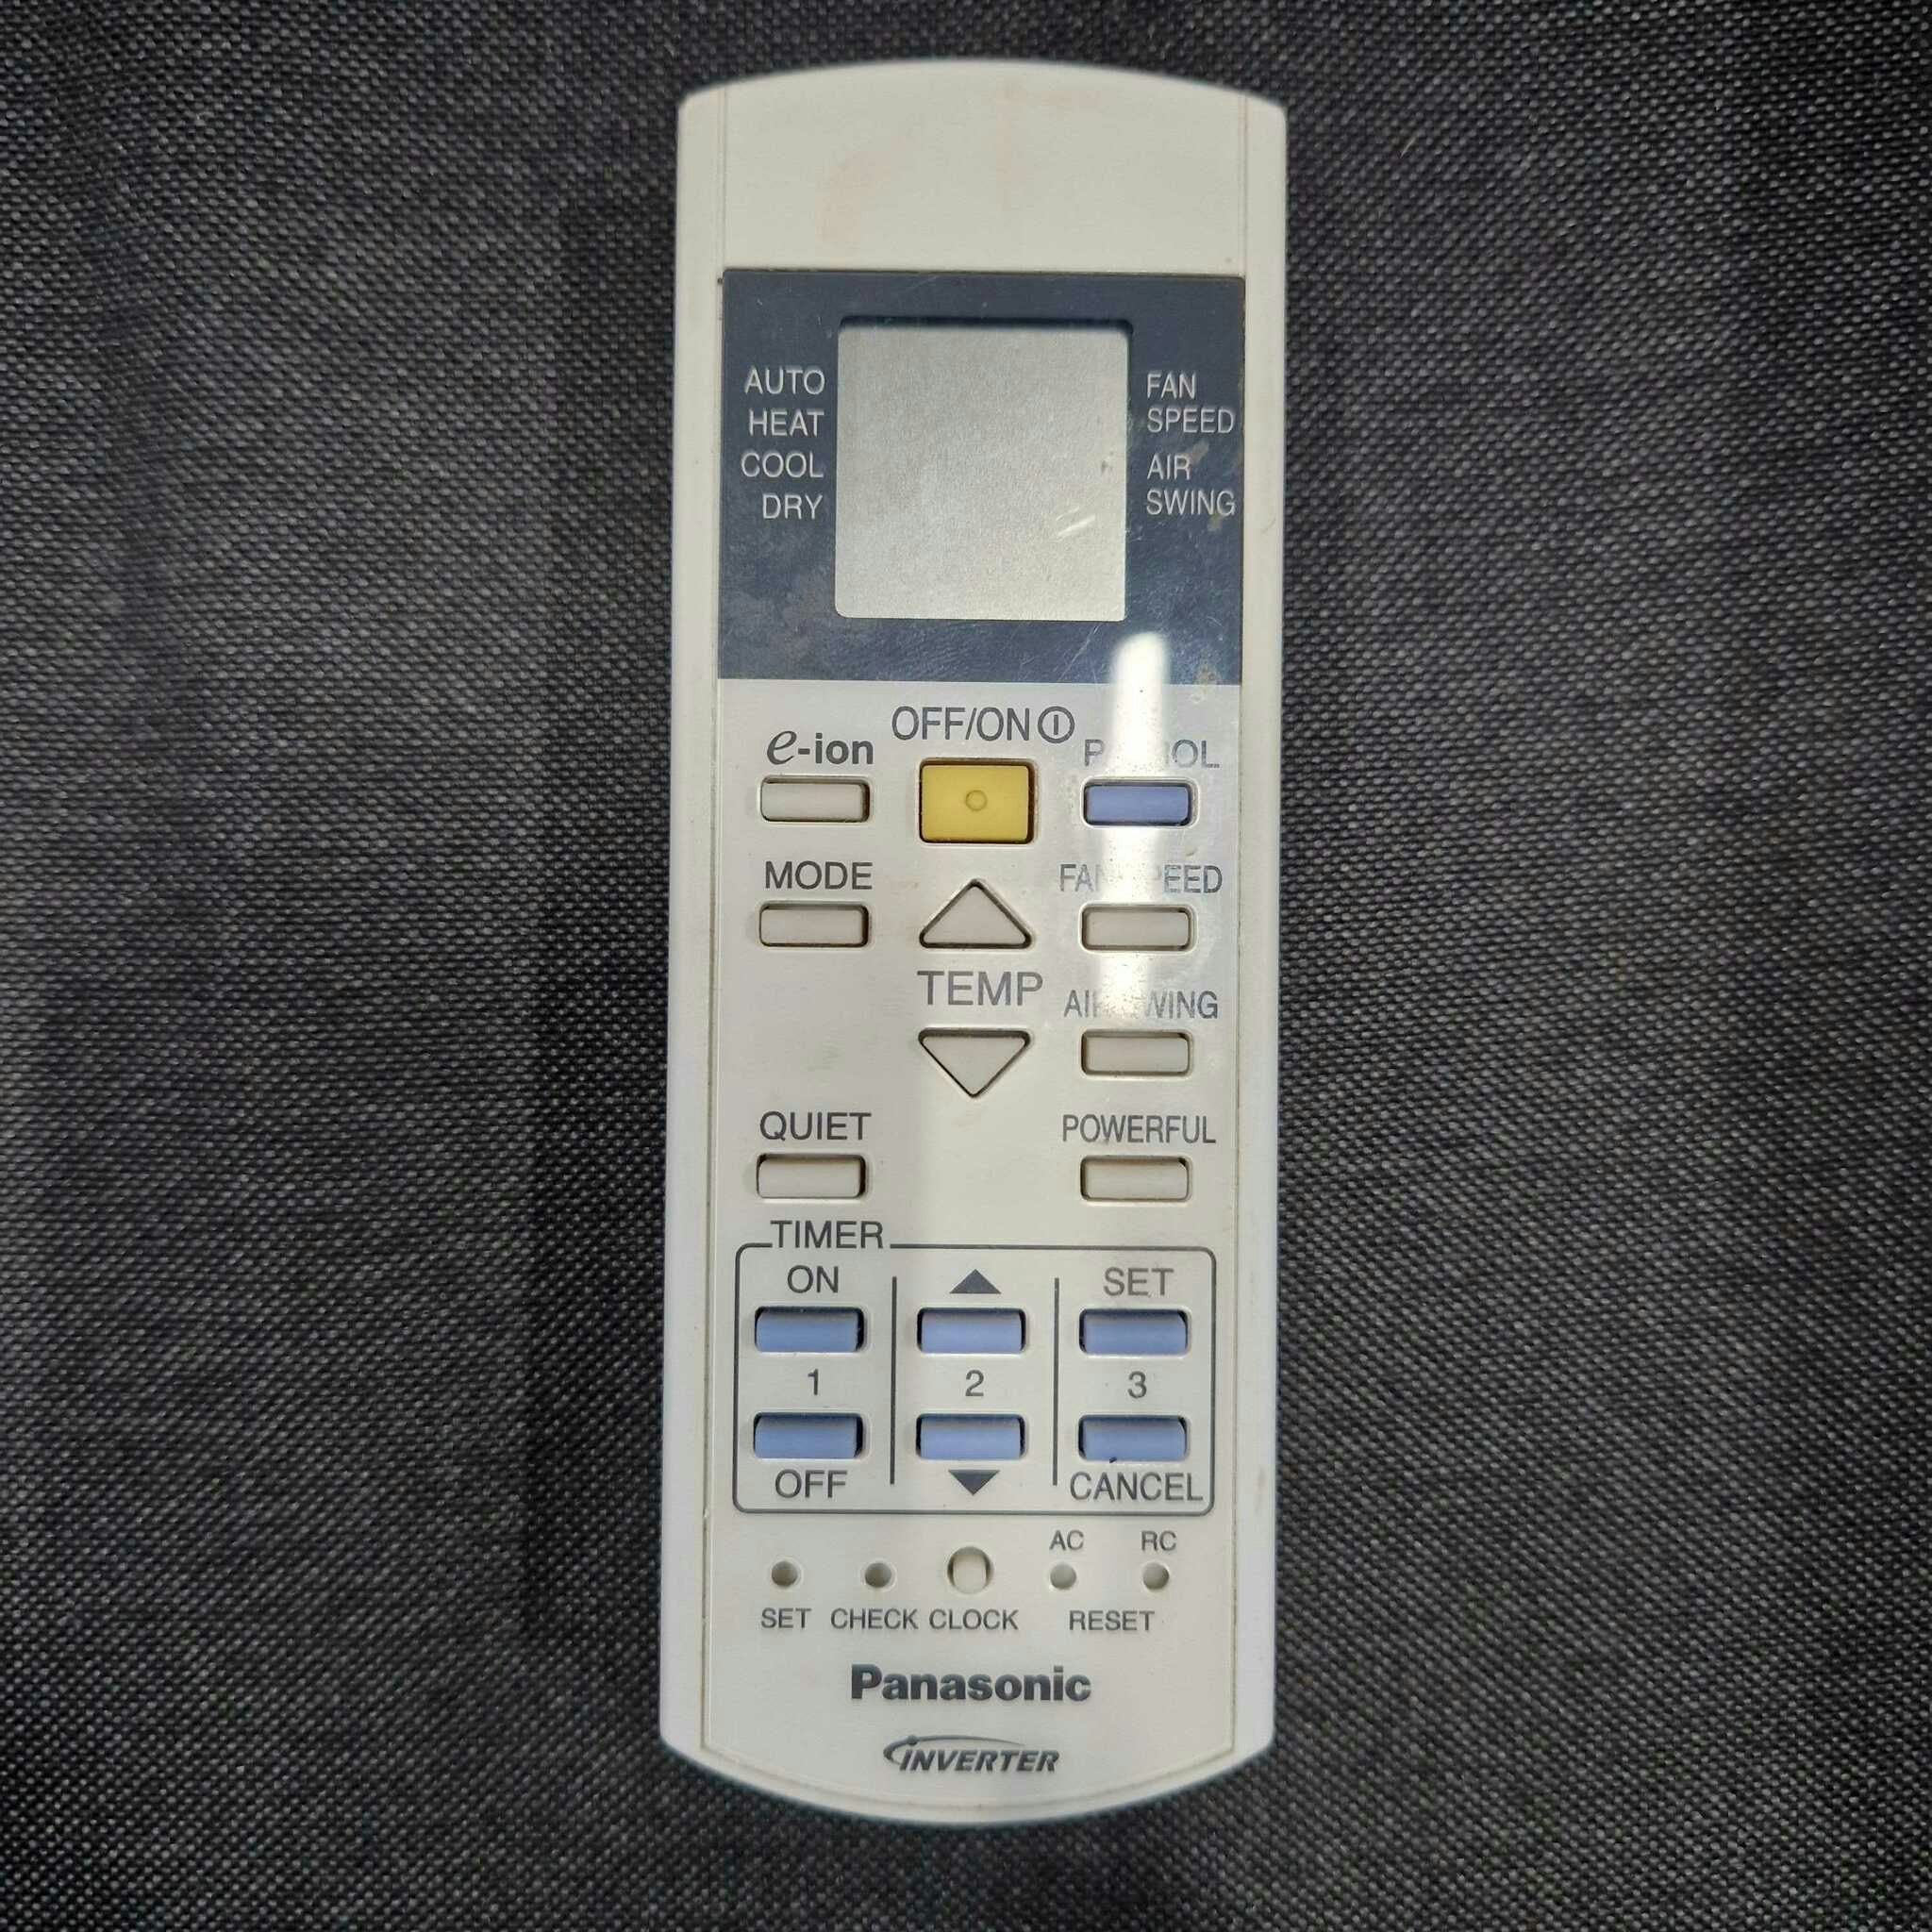 Panasonic Remote Control Part no. A75C3006 - Refurbished & Tested